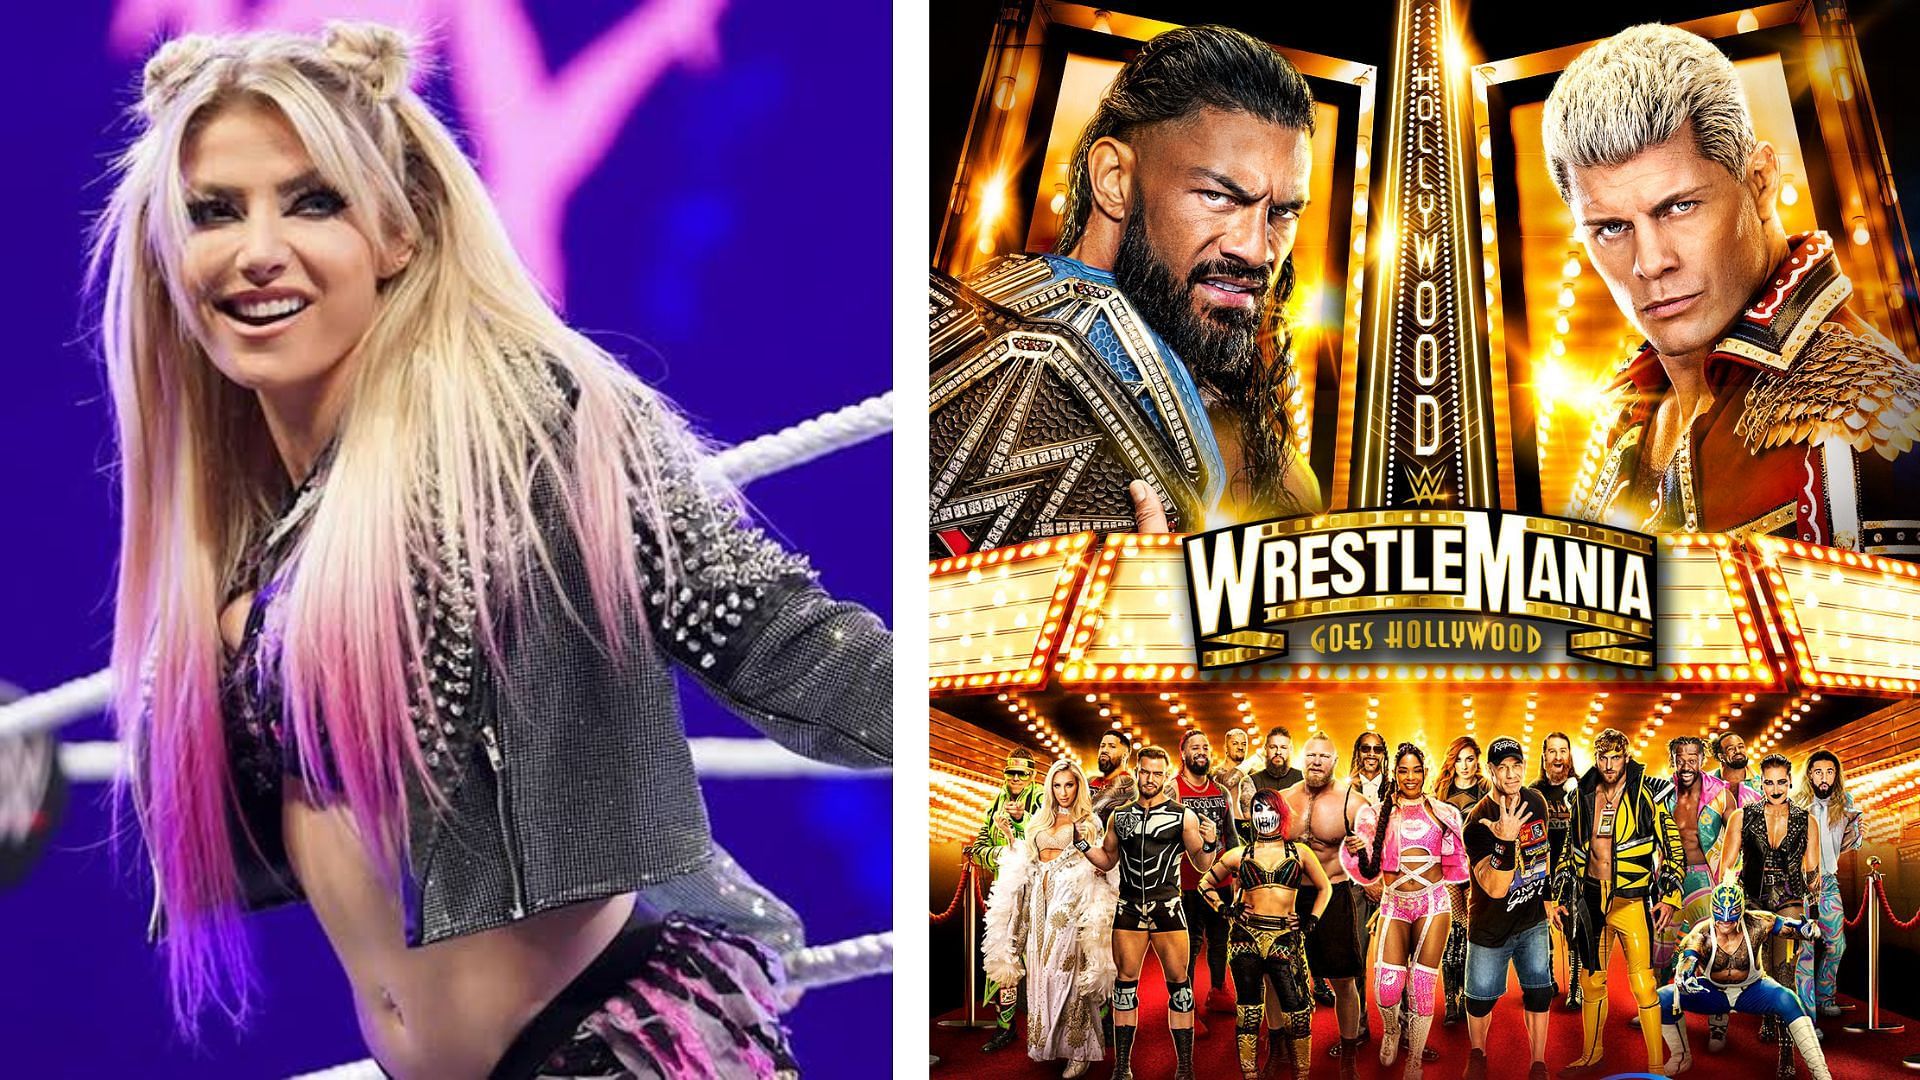 Alexa Bliss has been a part of multiple WrestleMania shows in the past